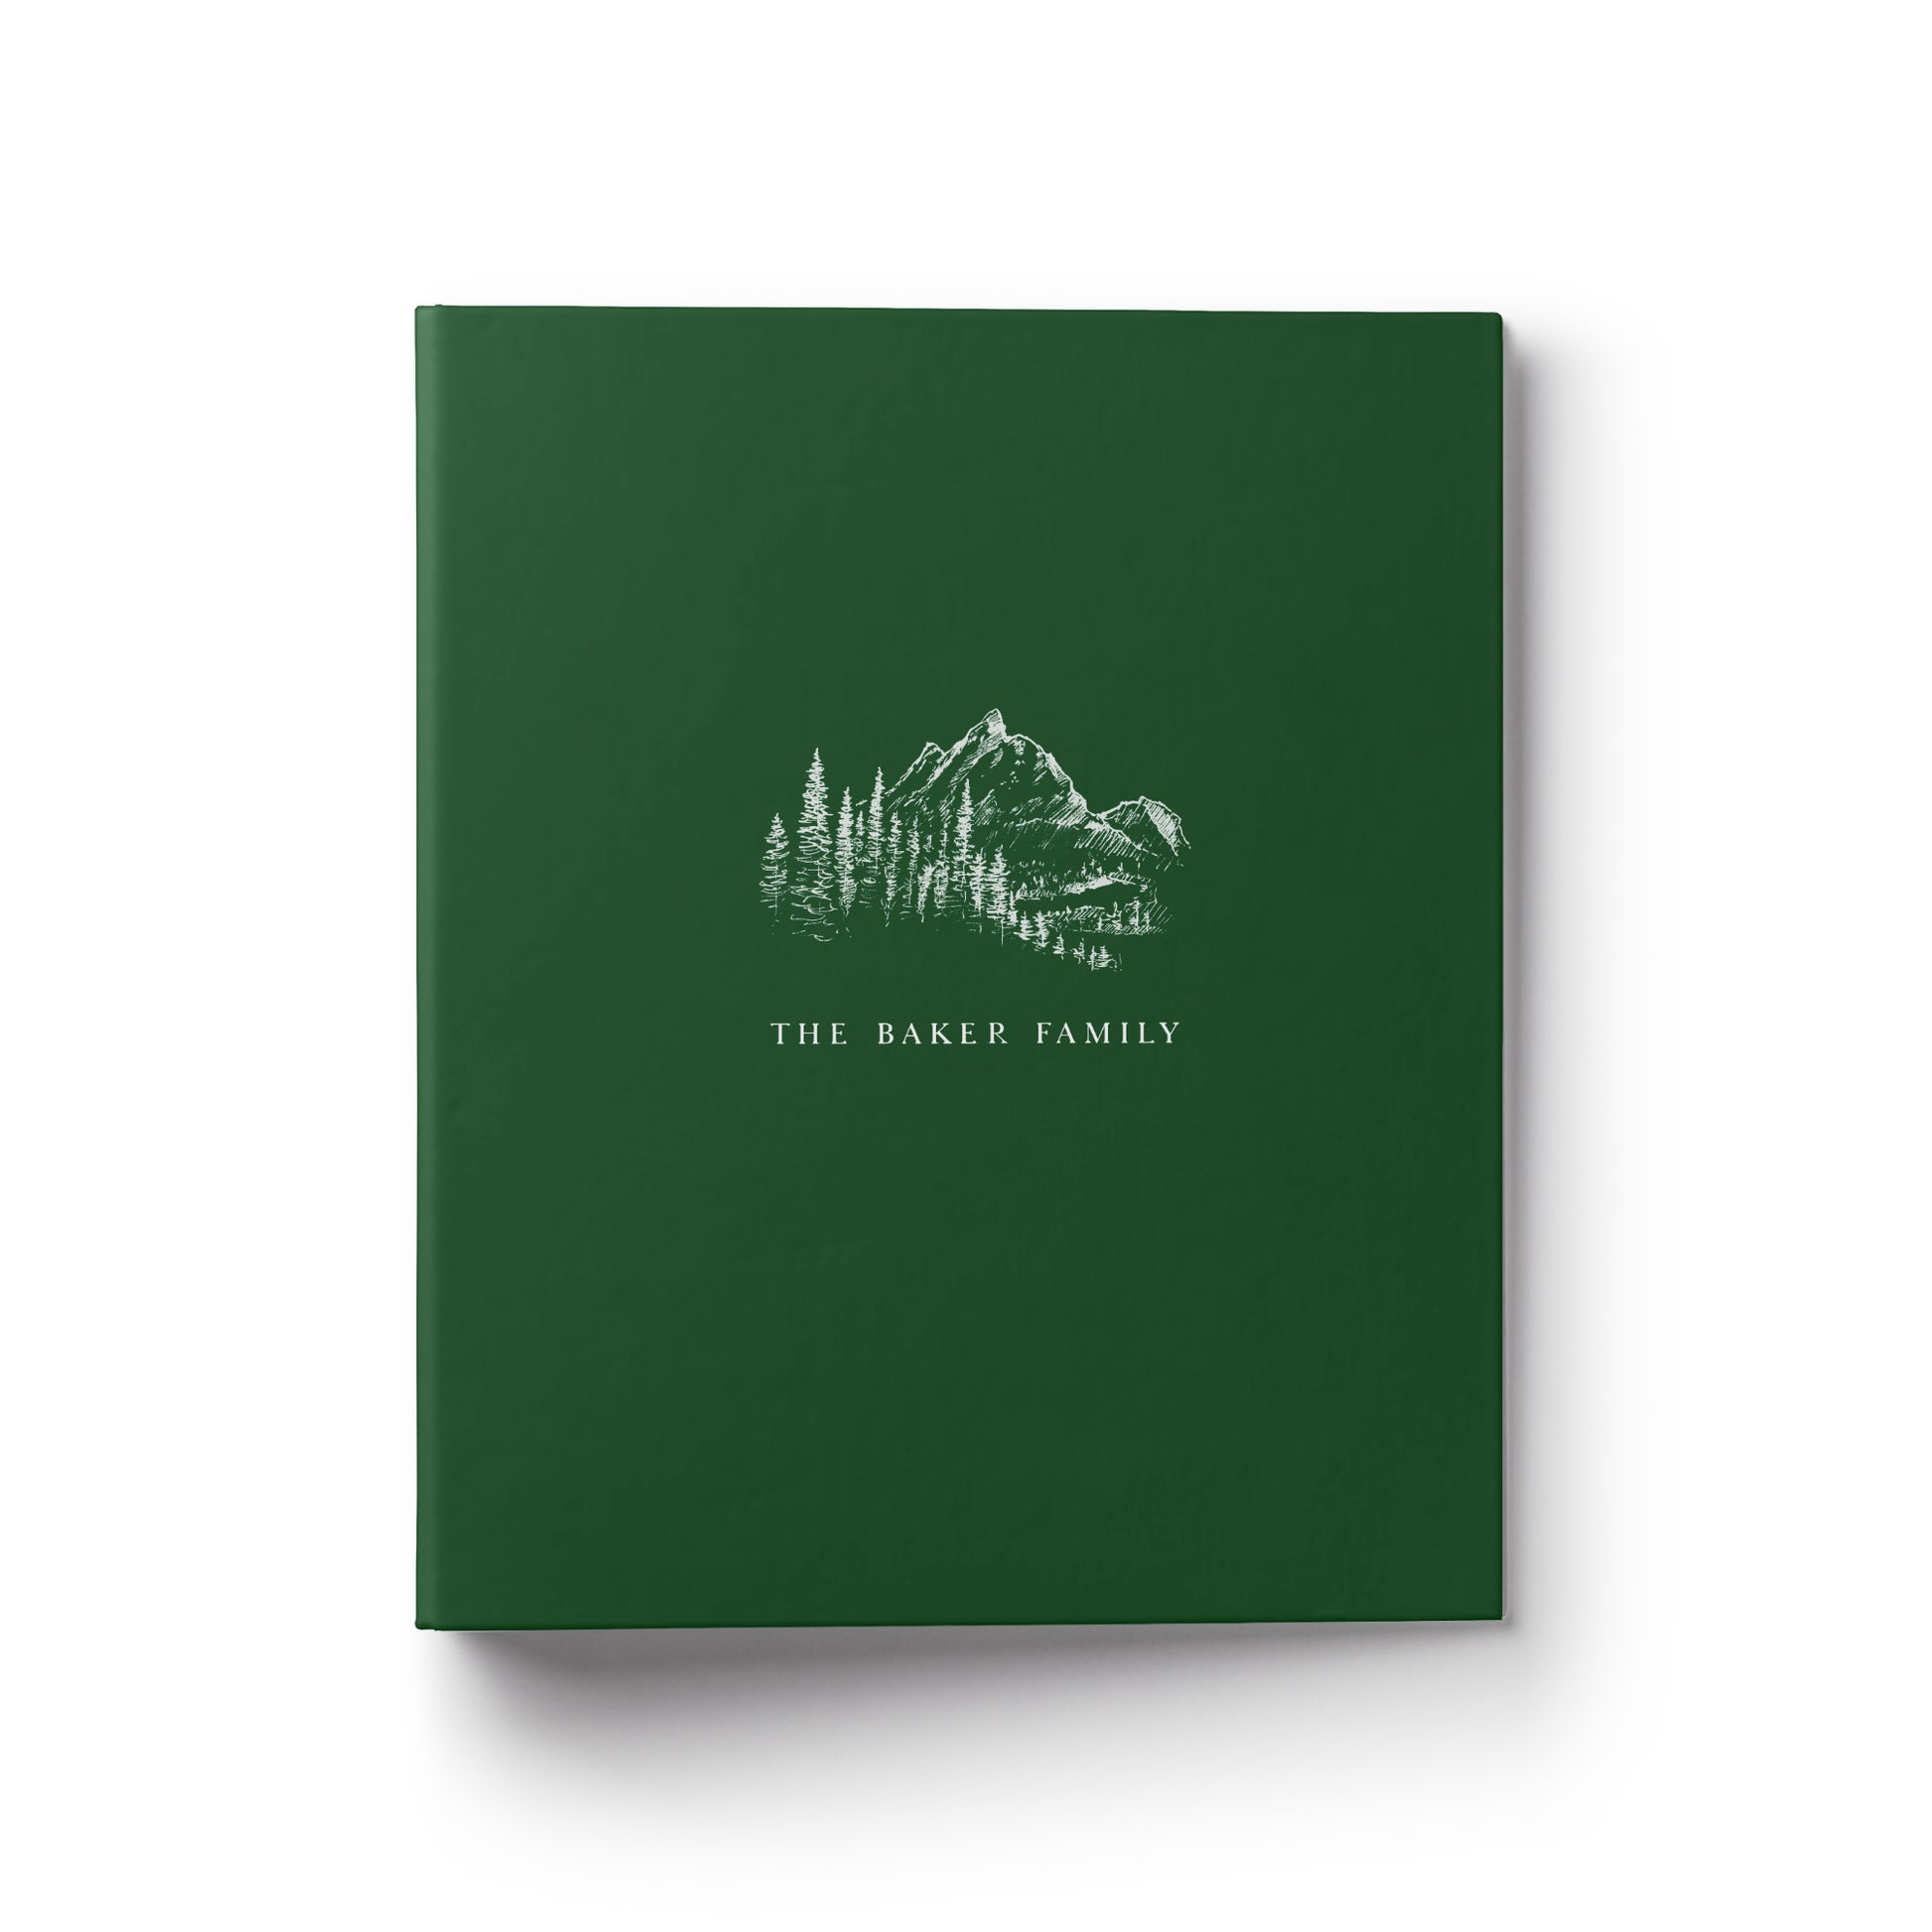 A custom recipe binder with a mountain theme makes the perfect gift for any occasion